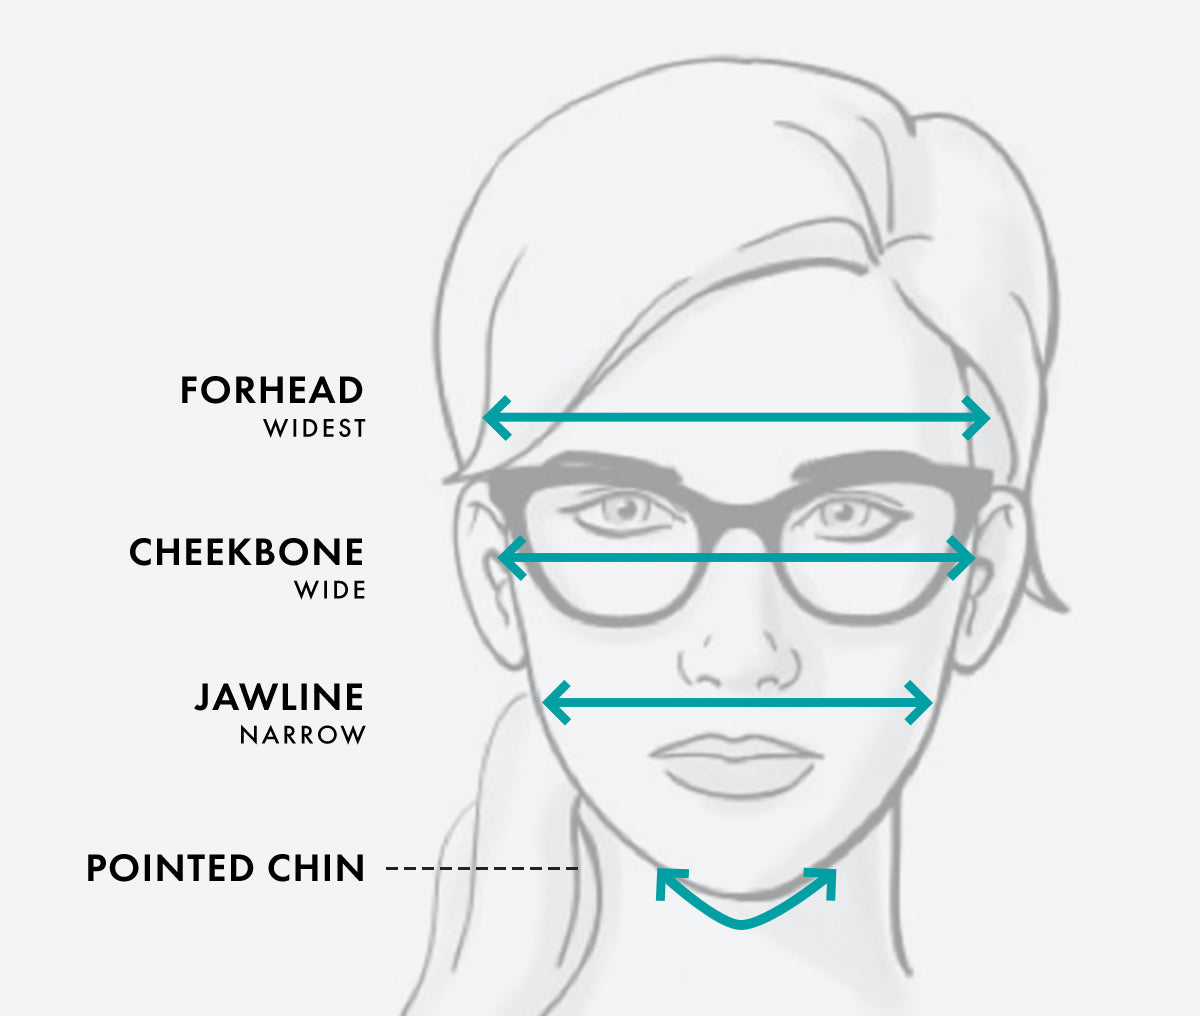 Best Glasses for Narrow Faces 